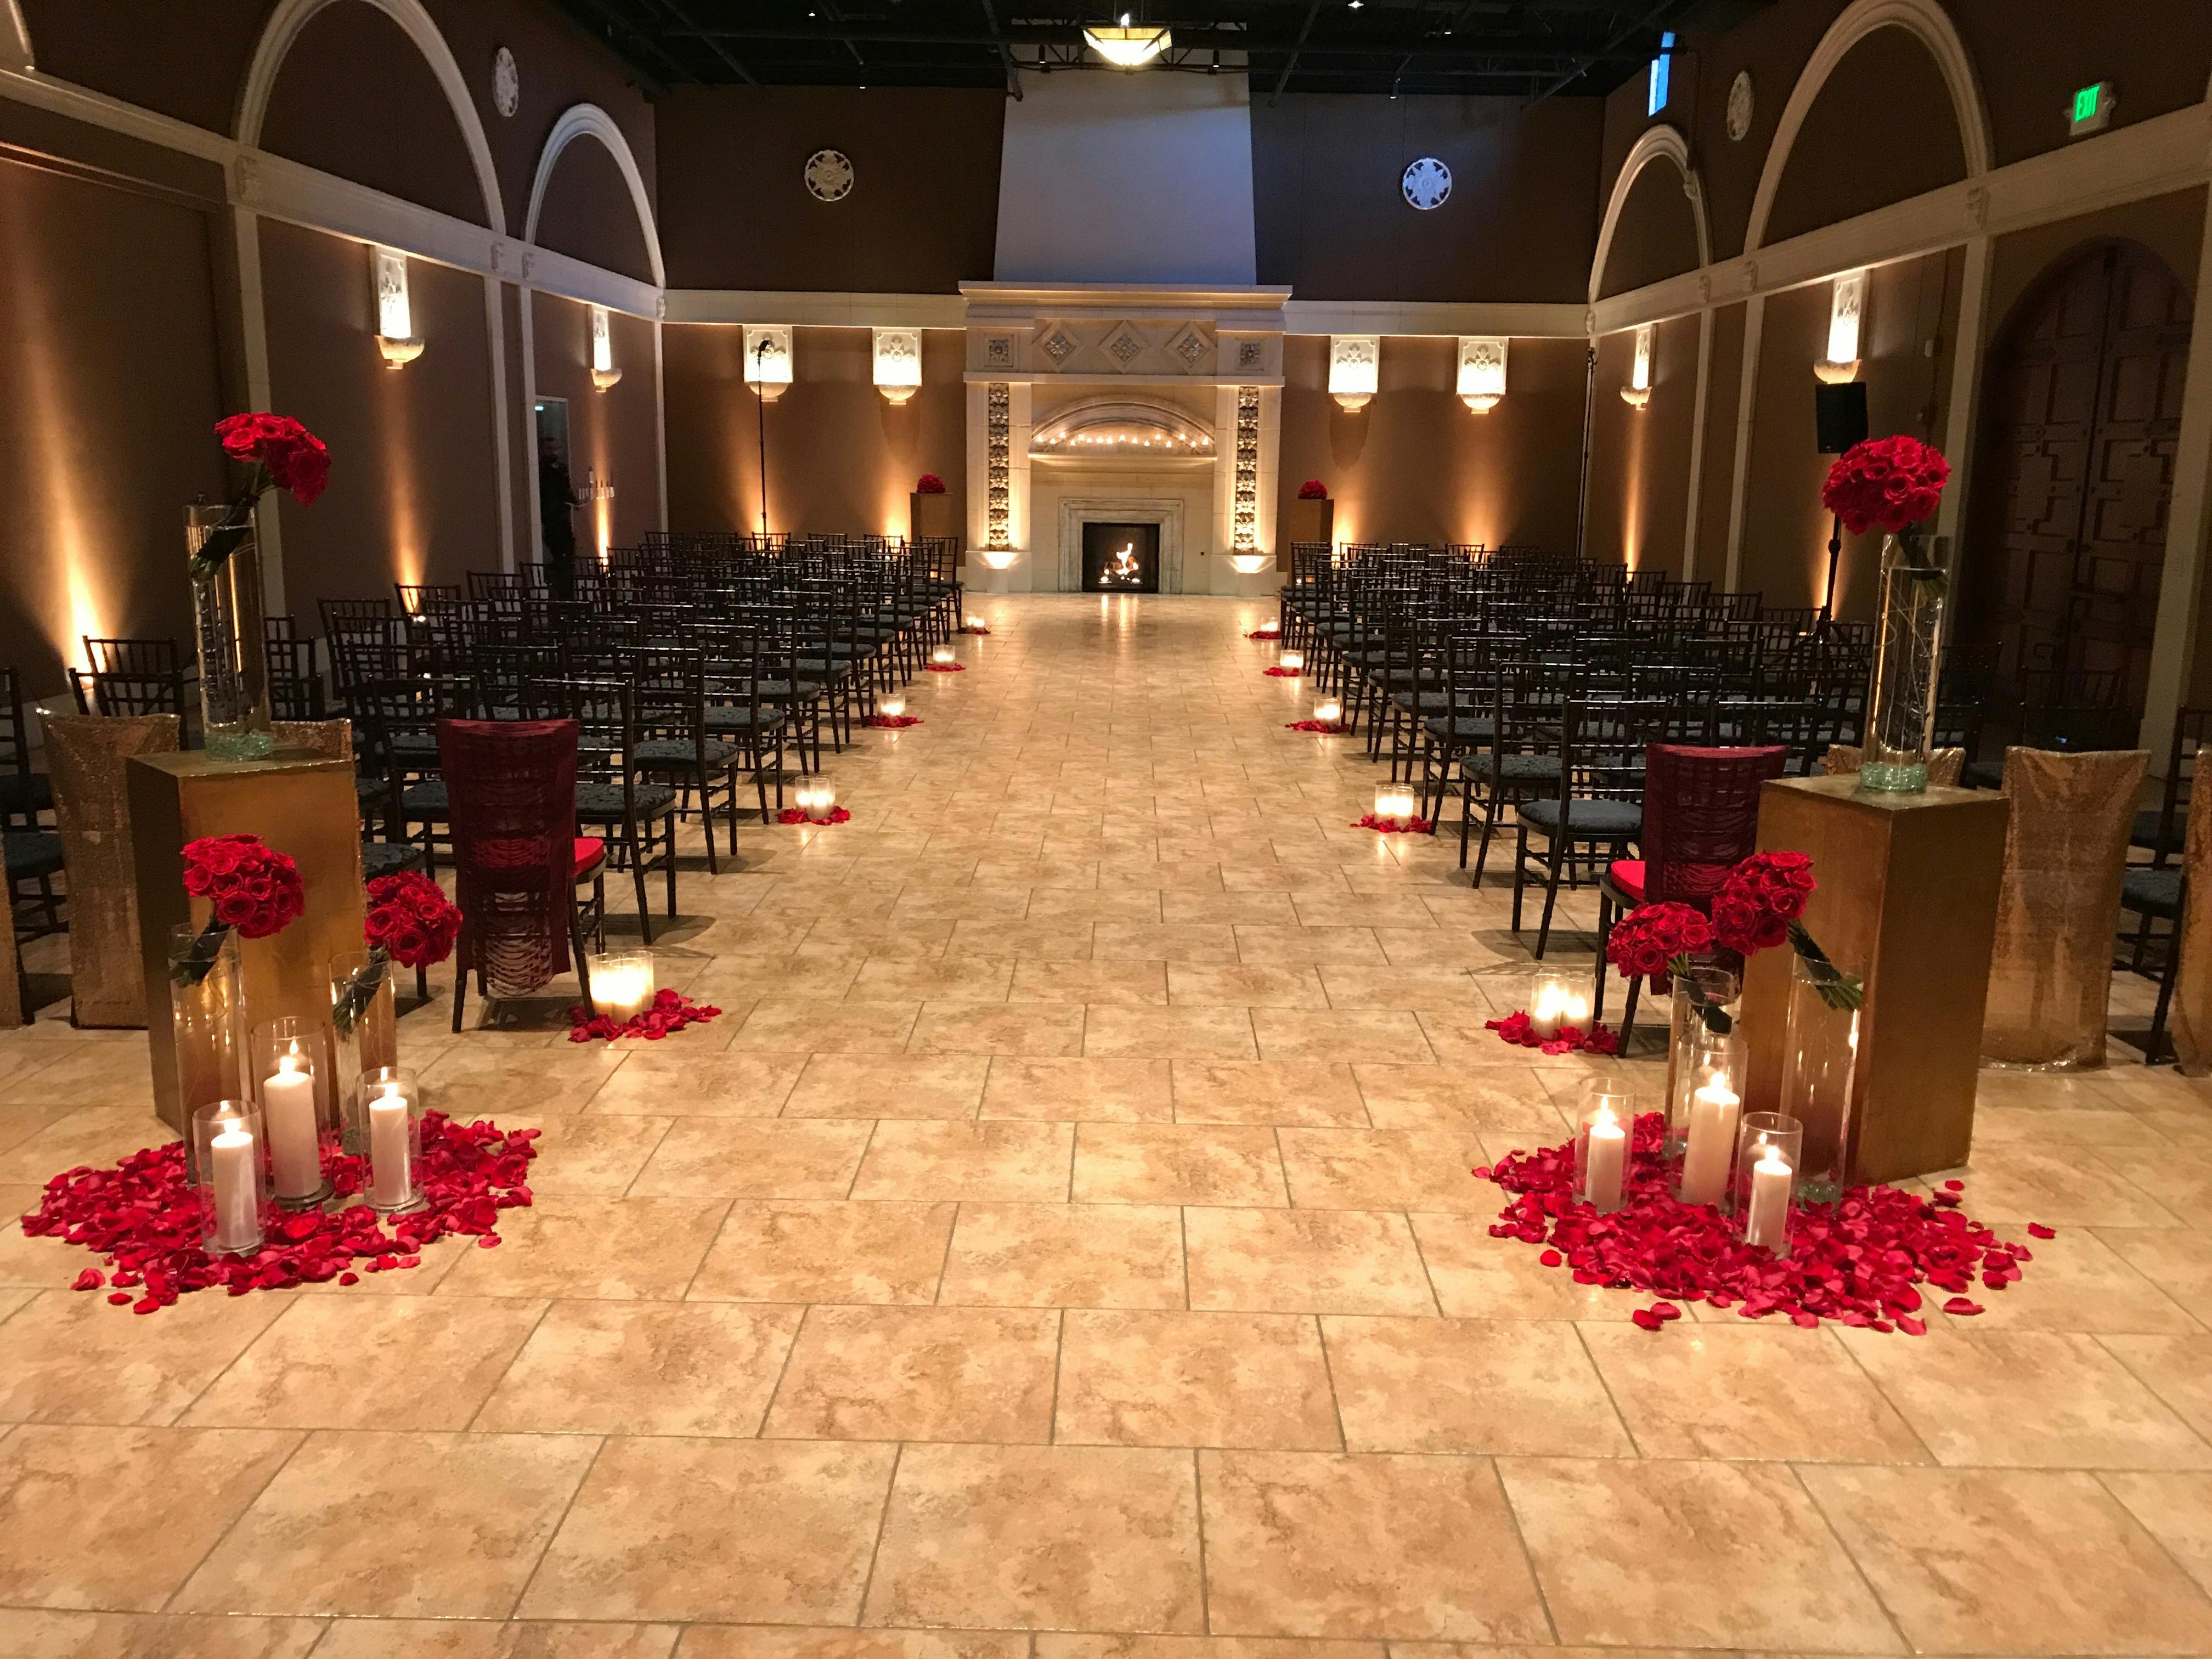 James Bond Inspired Wedding at Casa Real at Ruby Hill Winery in Pleasanton, CA With Candle-Lit Wedding Aisle Décor